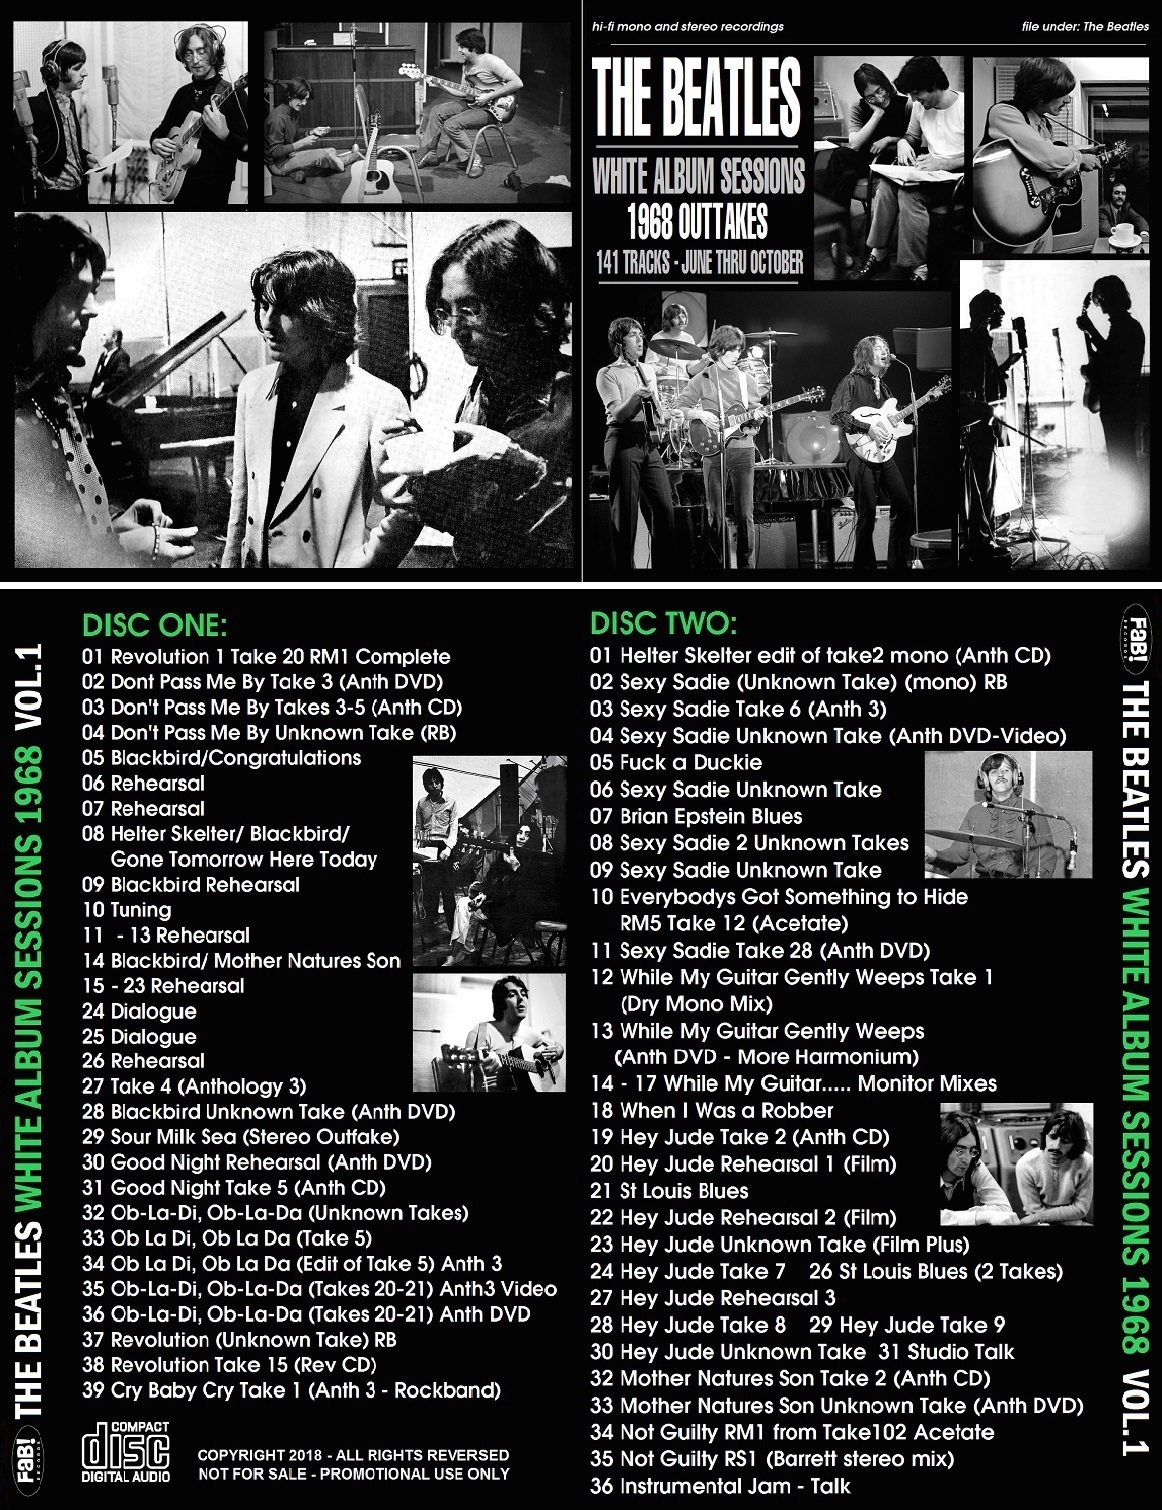 The Beatles - White Album Sessions 1968 Outtakes Vol.1 (2 CD Set).jpg